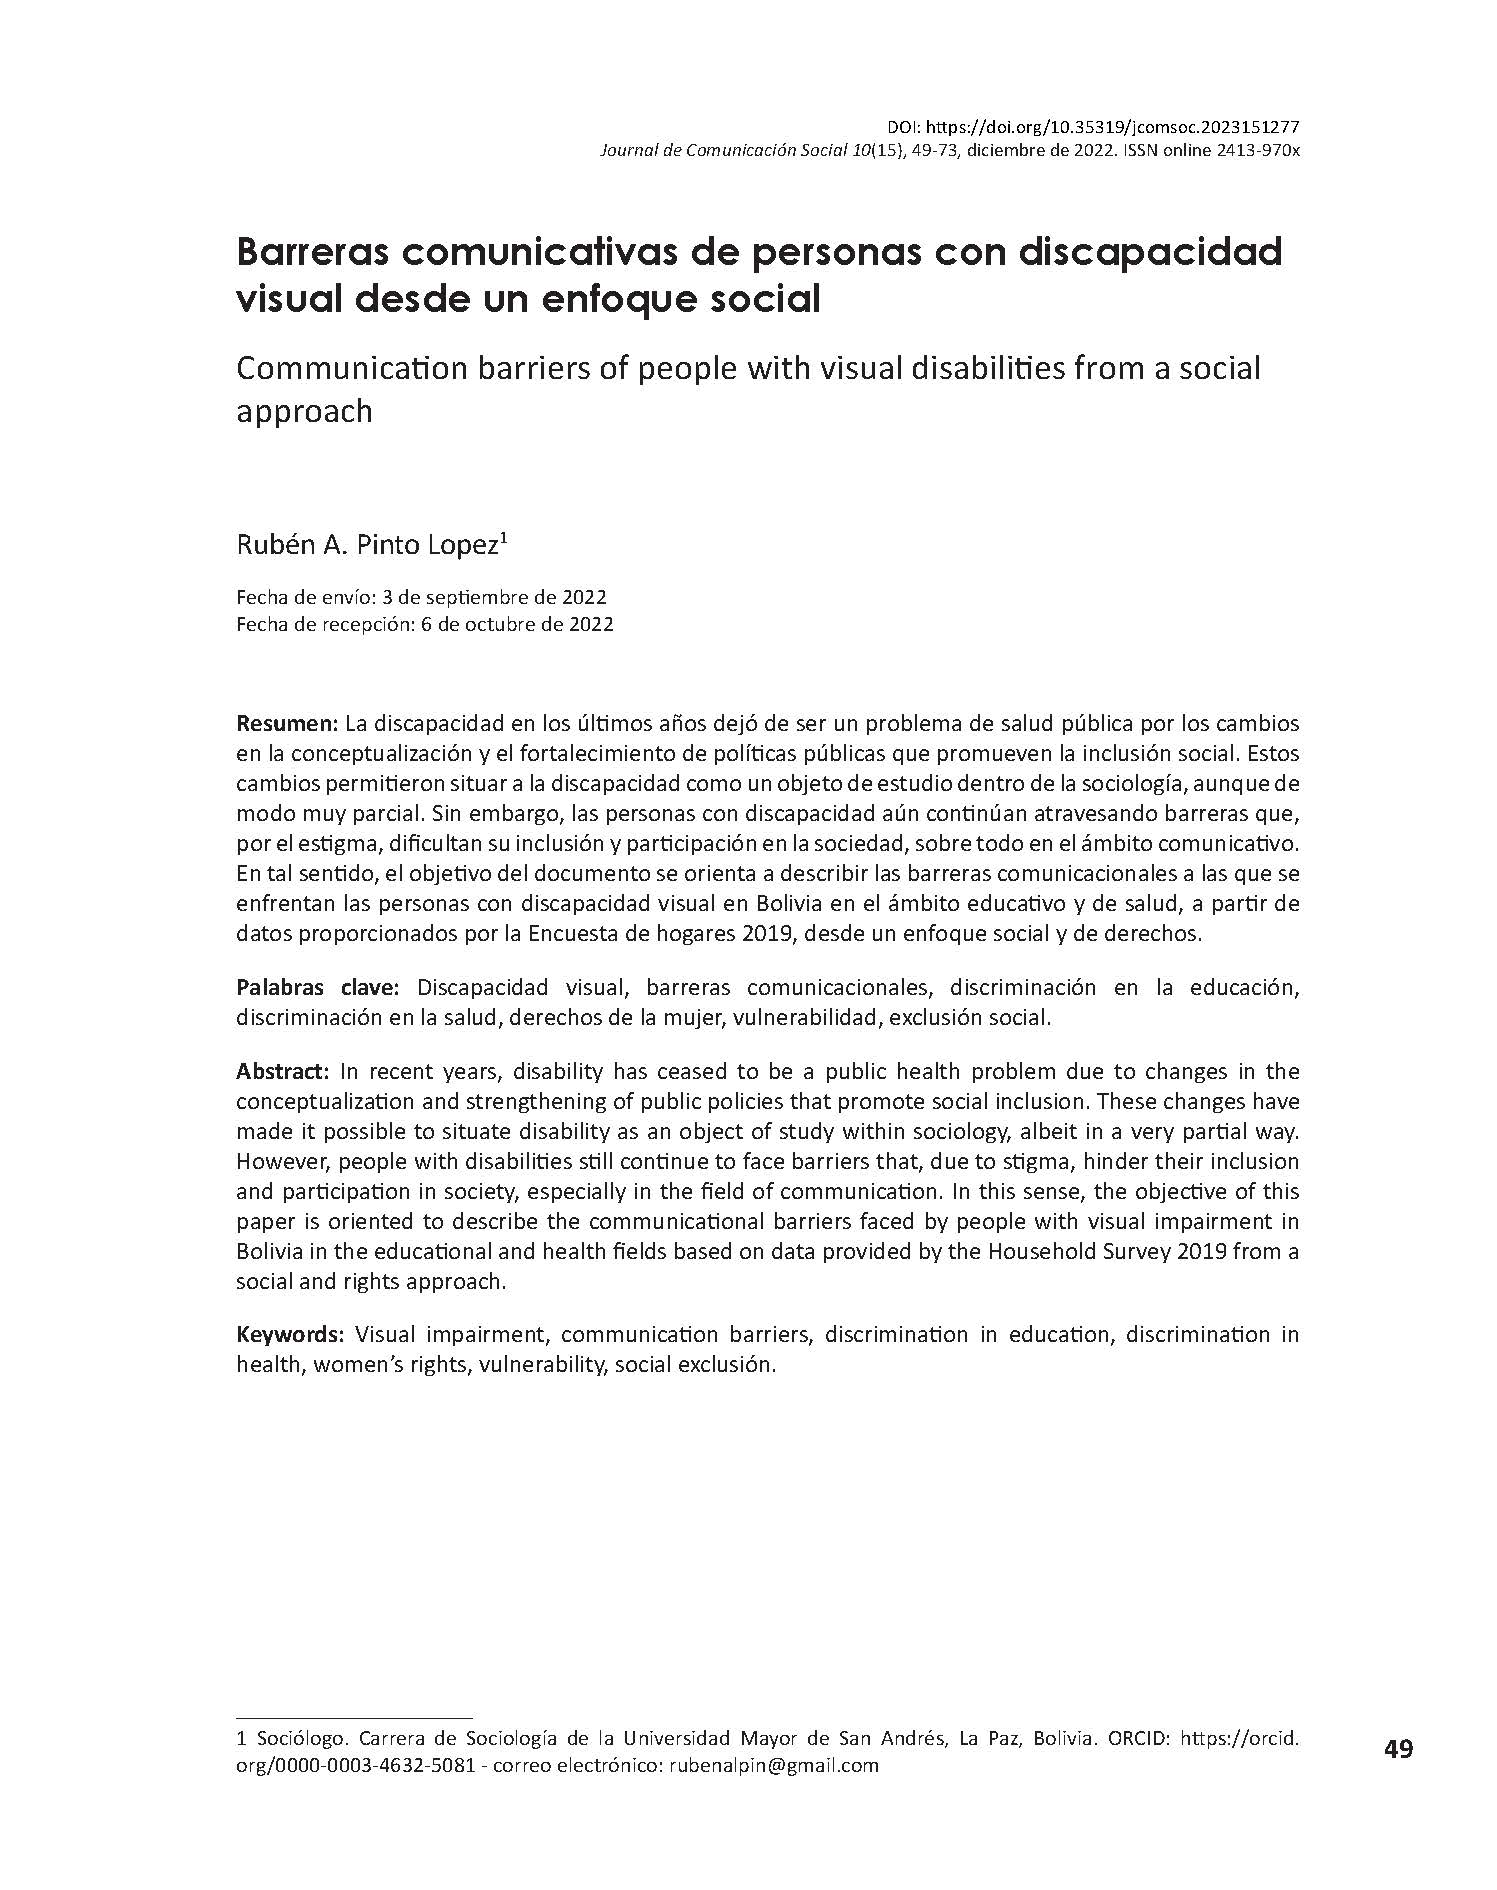 Communication barriers of people with visual disabilities from a social approach